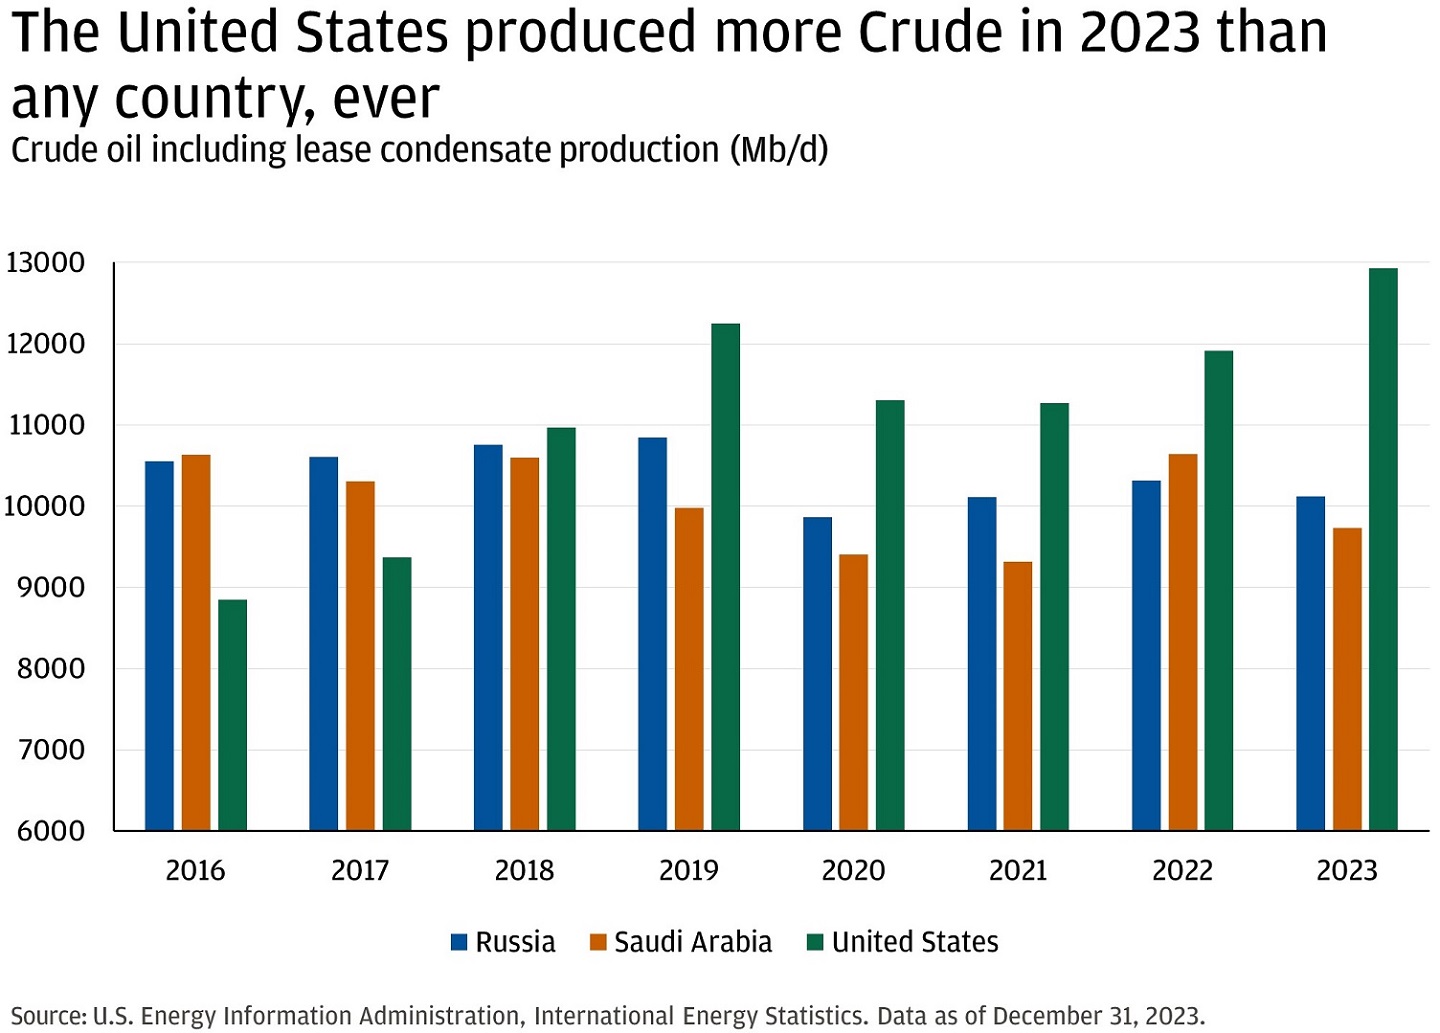 This chart shows the average daily production of Crude oil of Russia, Saudia Arabia, and the United States from 2016 to 2023.